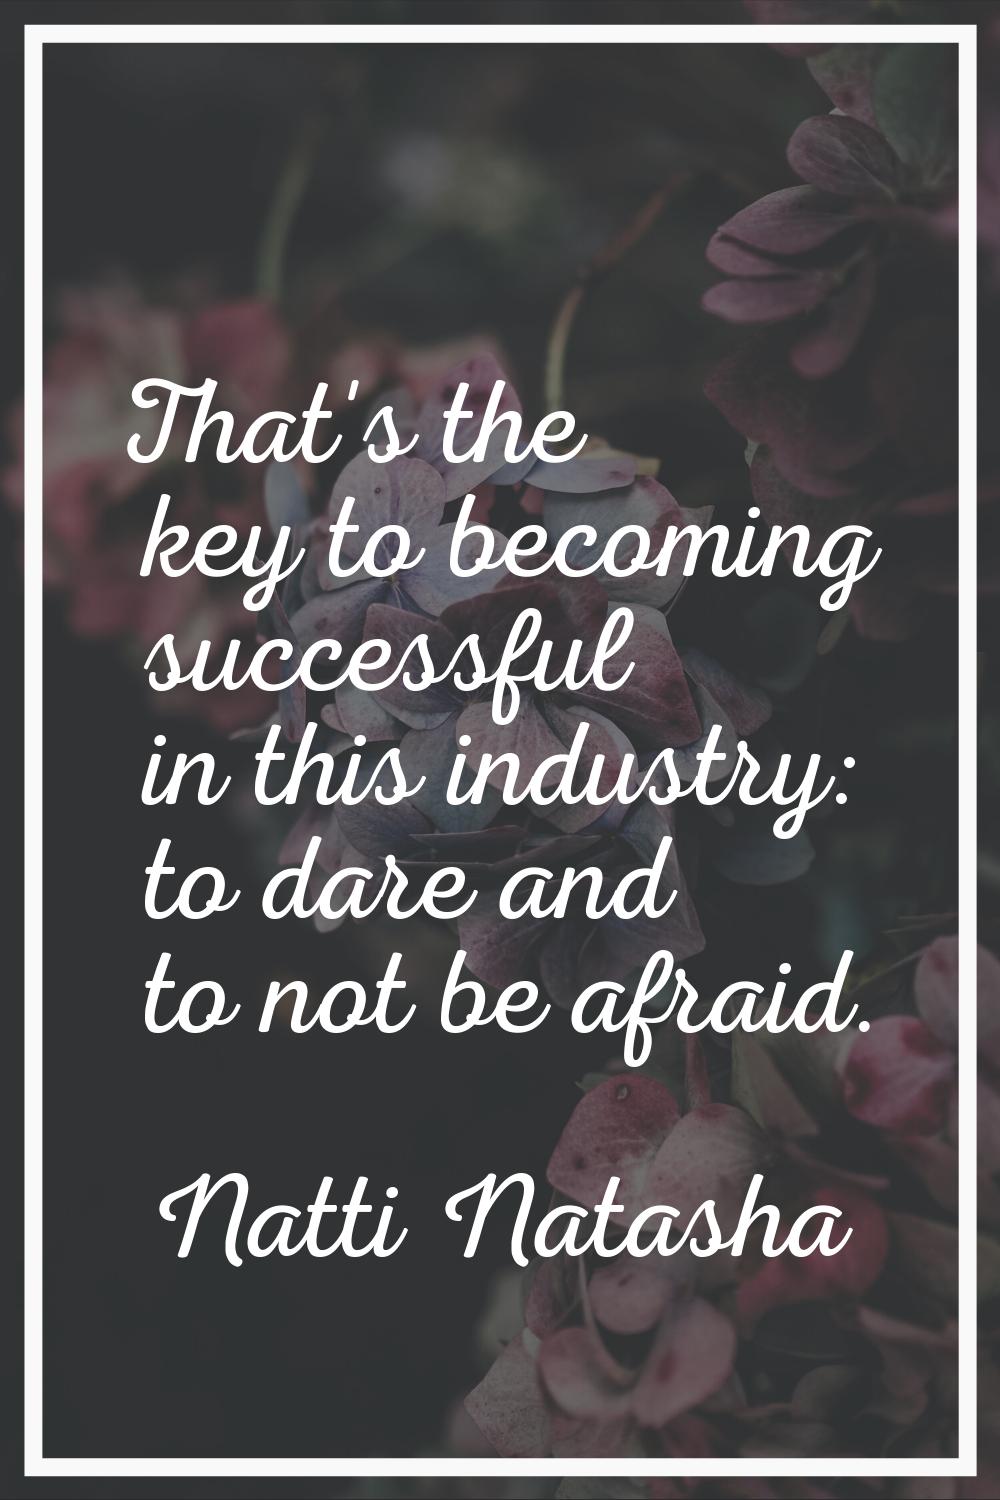 That's the key to becoming successful in this industry: to dare and to not be afraid.